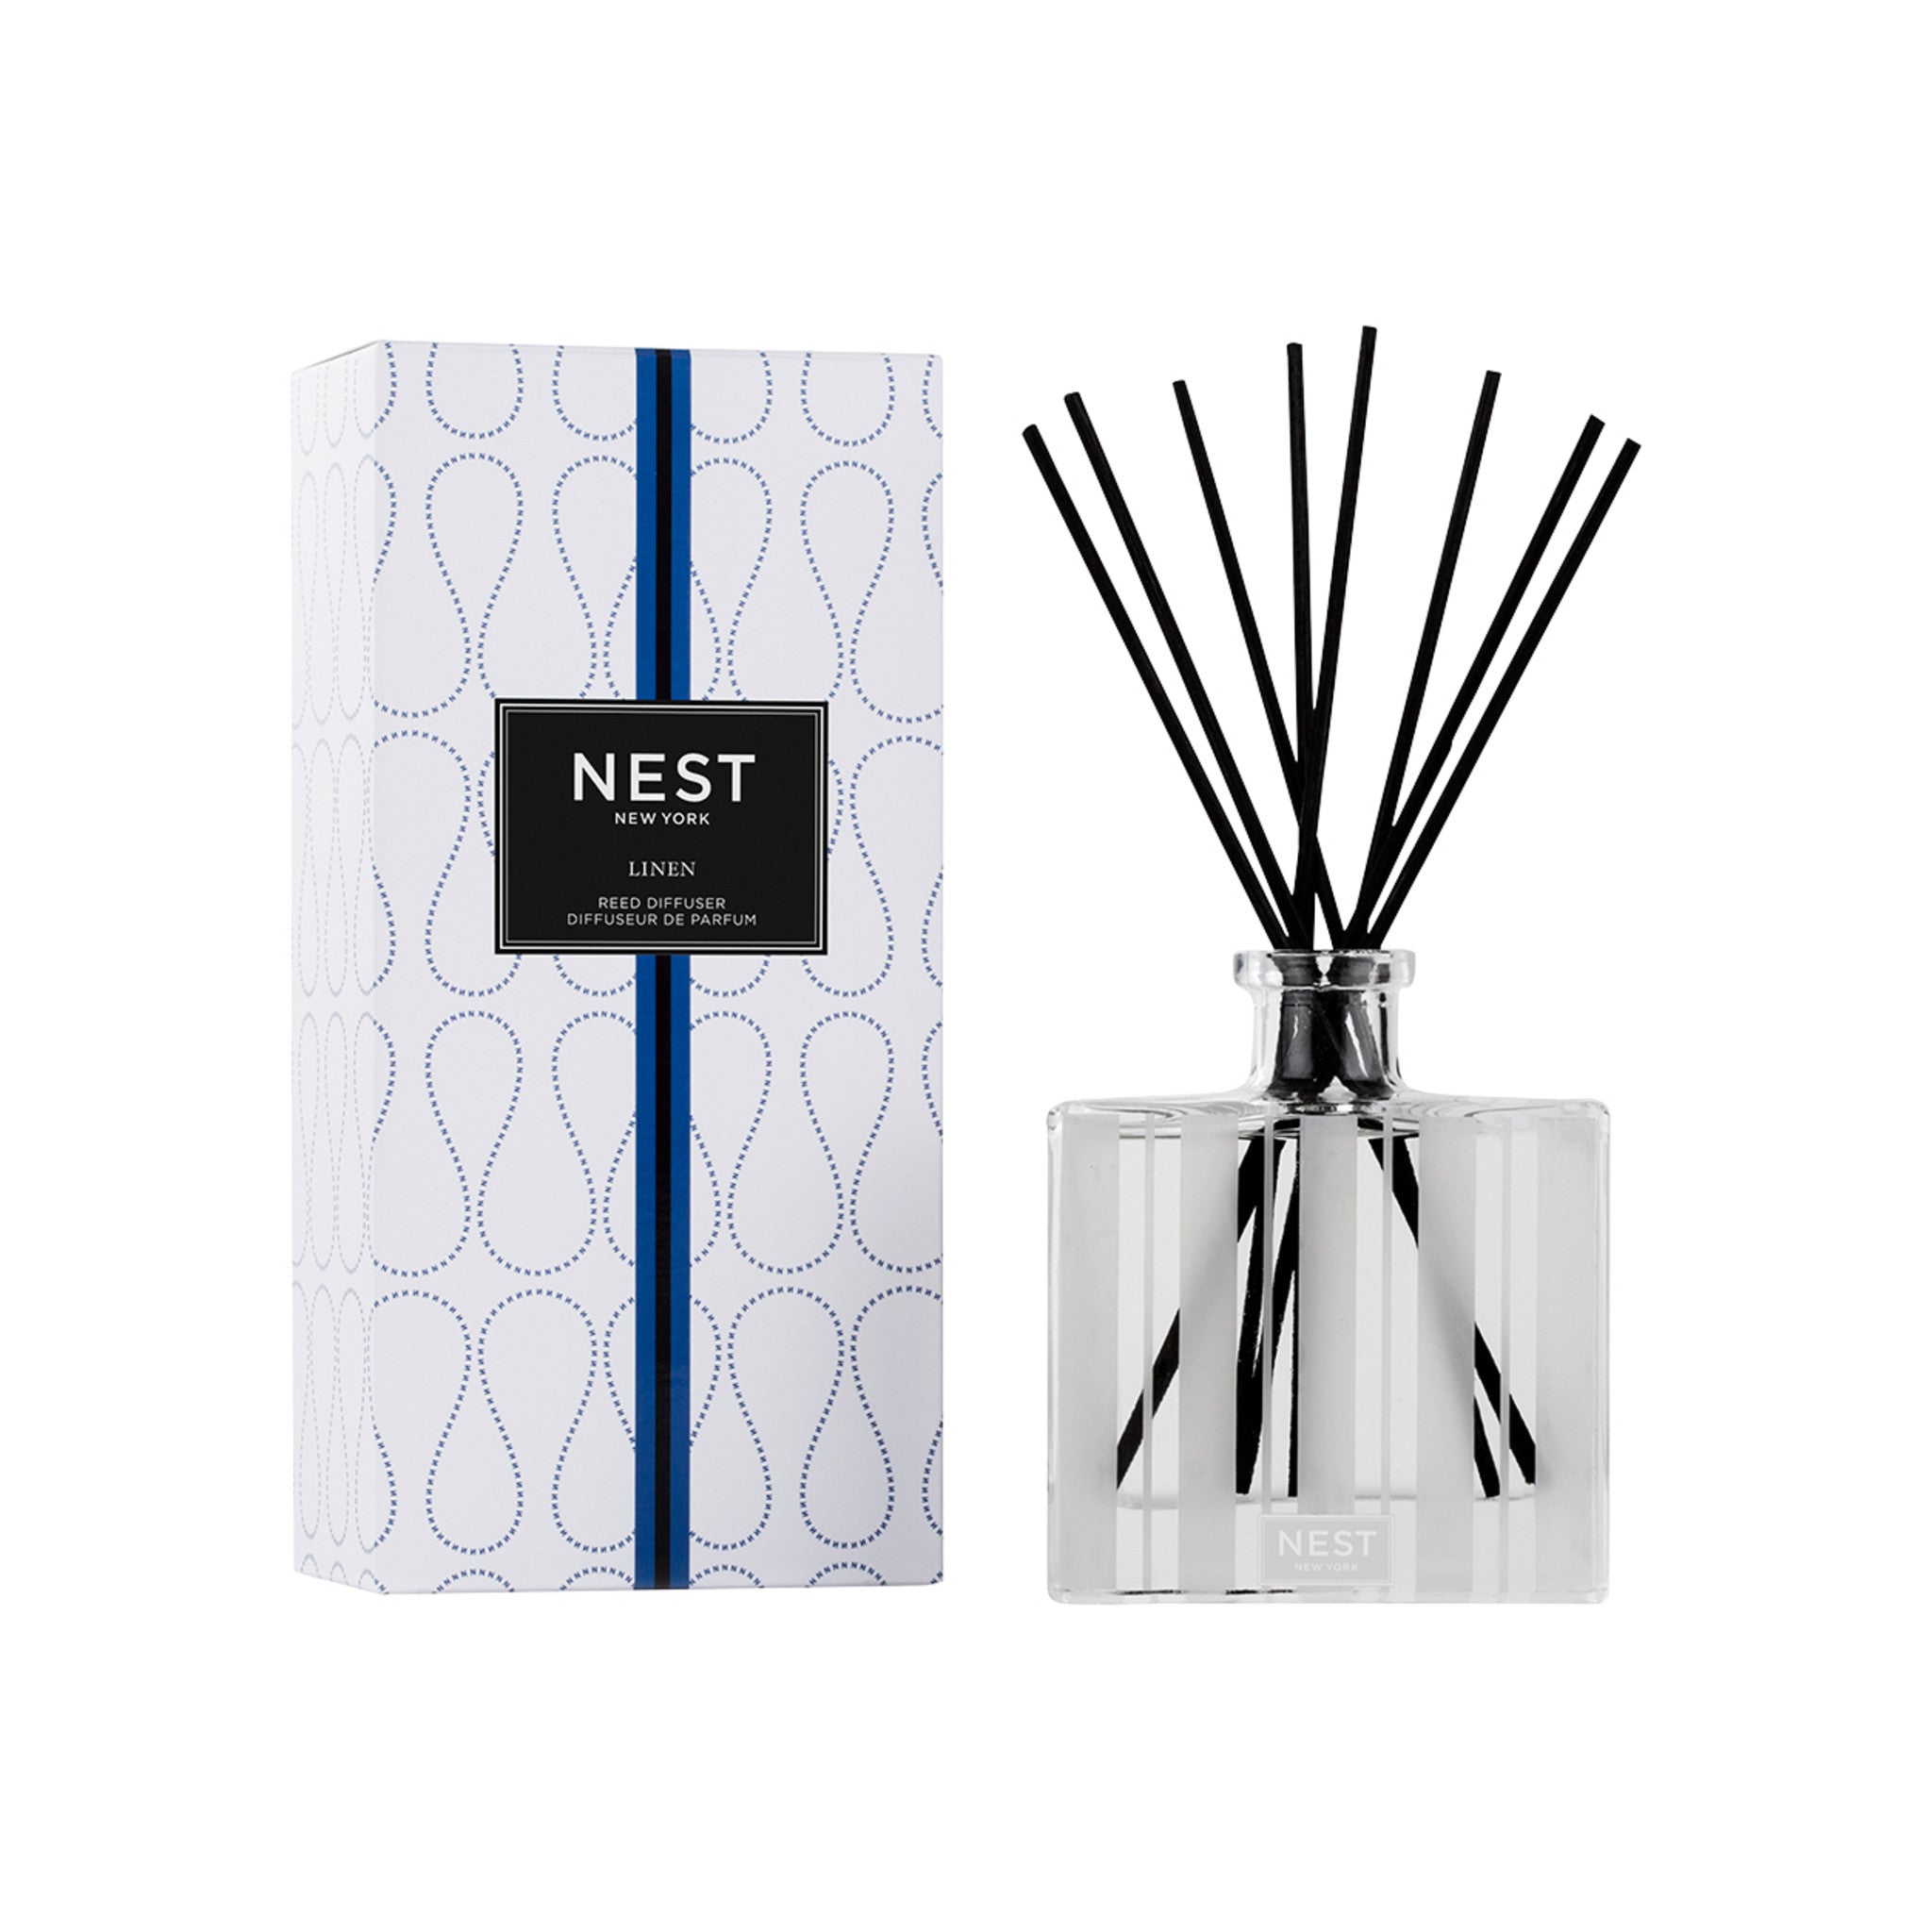 Nest Linen Reed Diffuser main image.